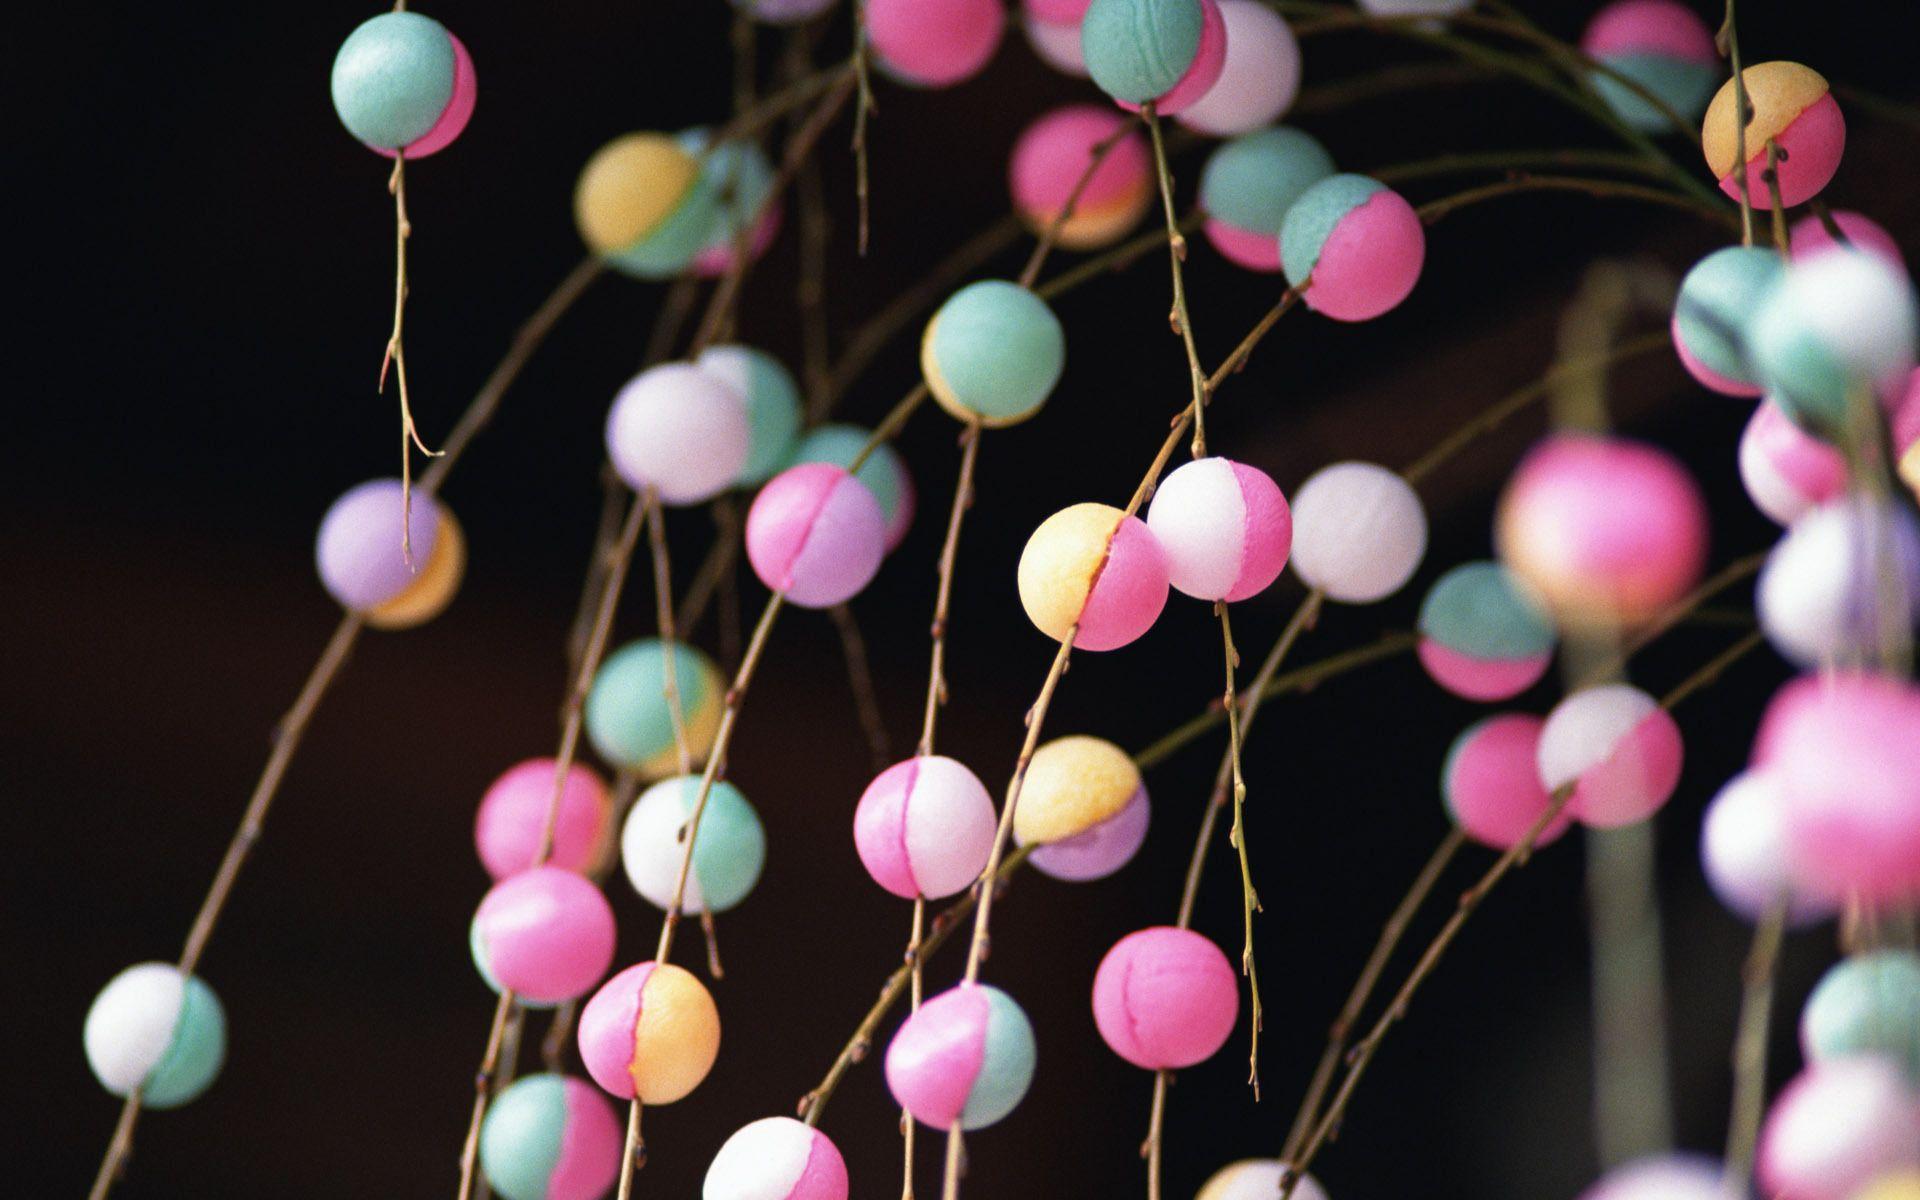 Beads on branches wallpaper and image, picture, photo